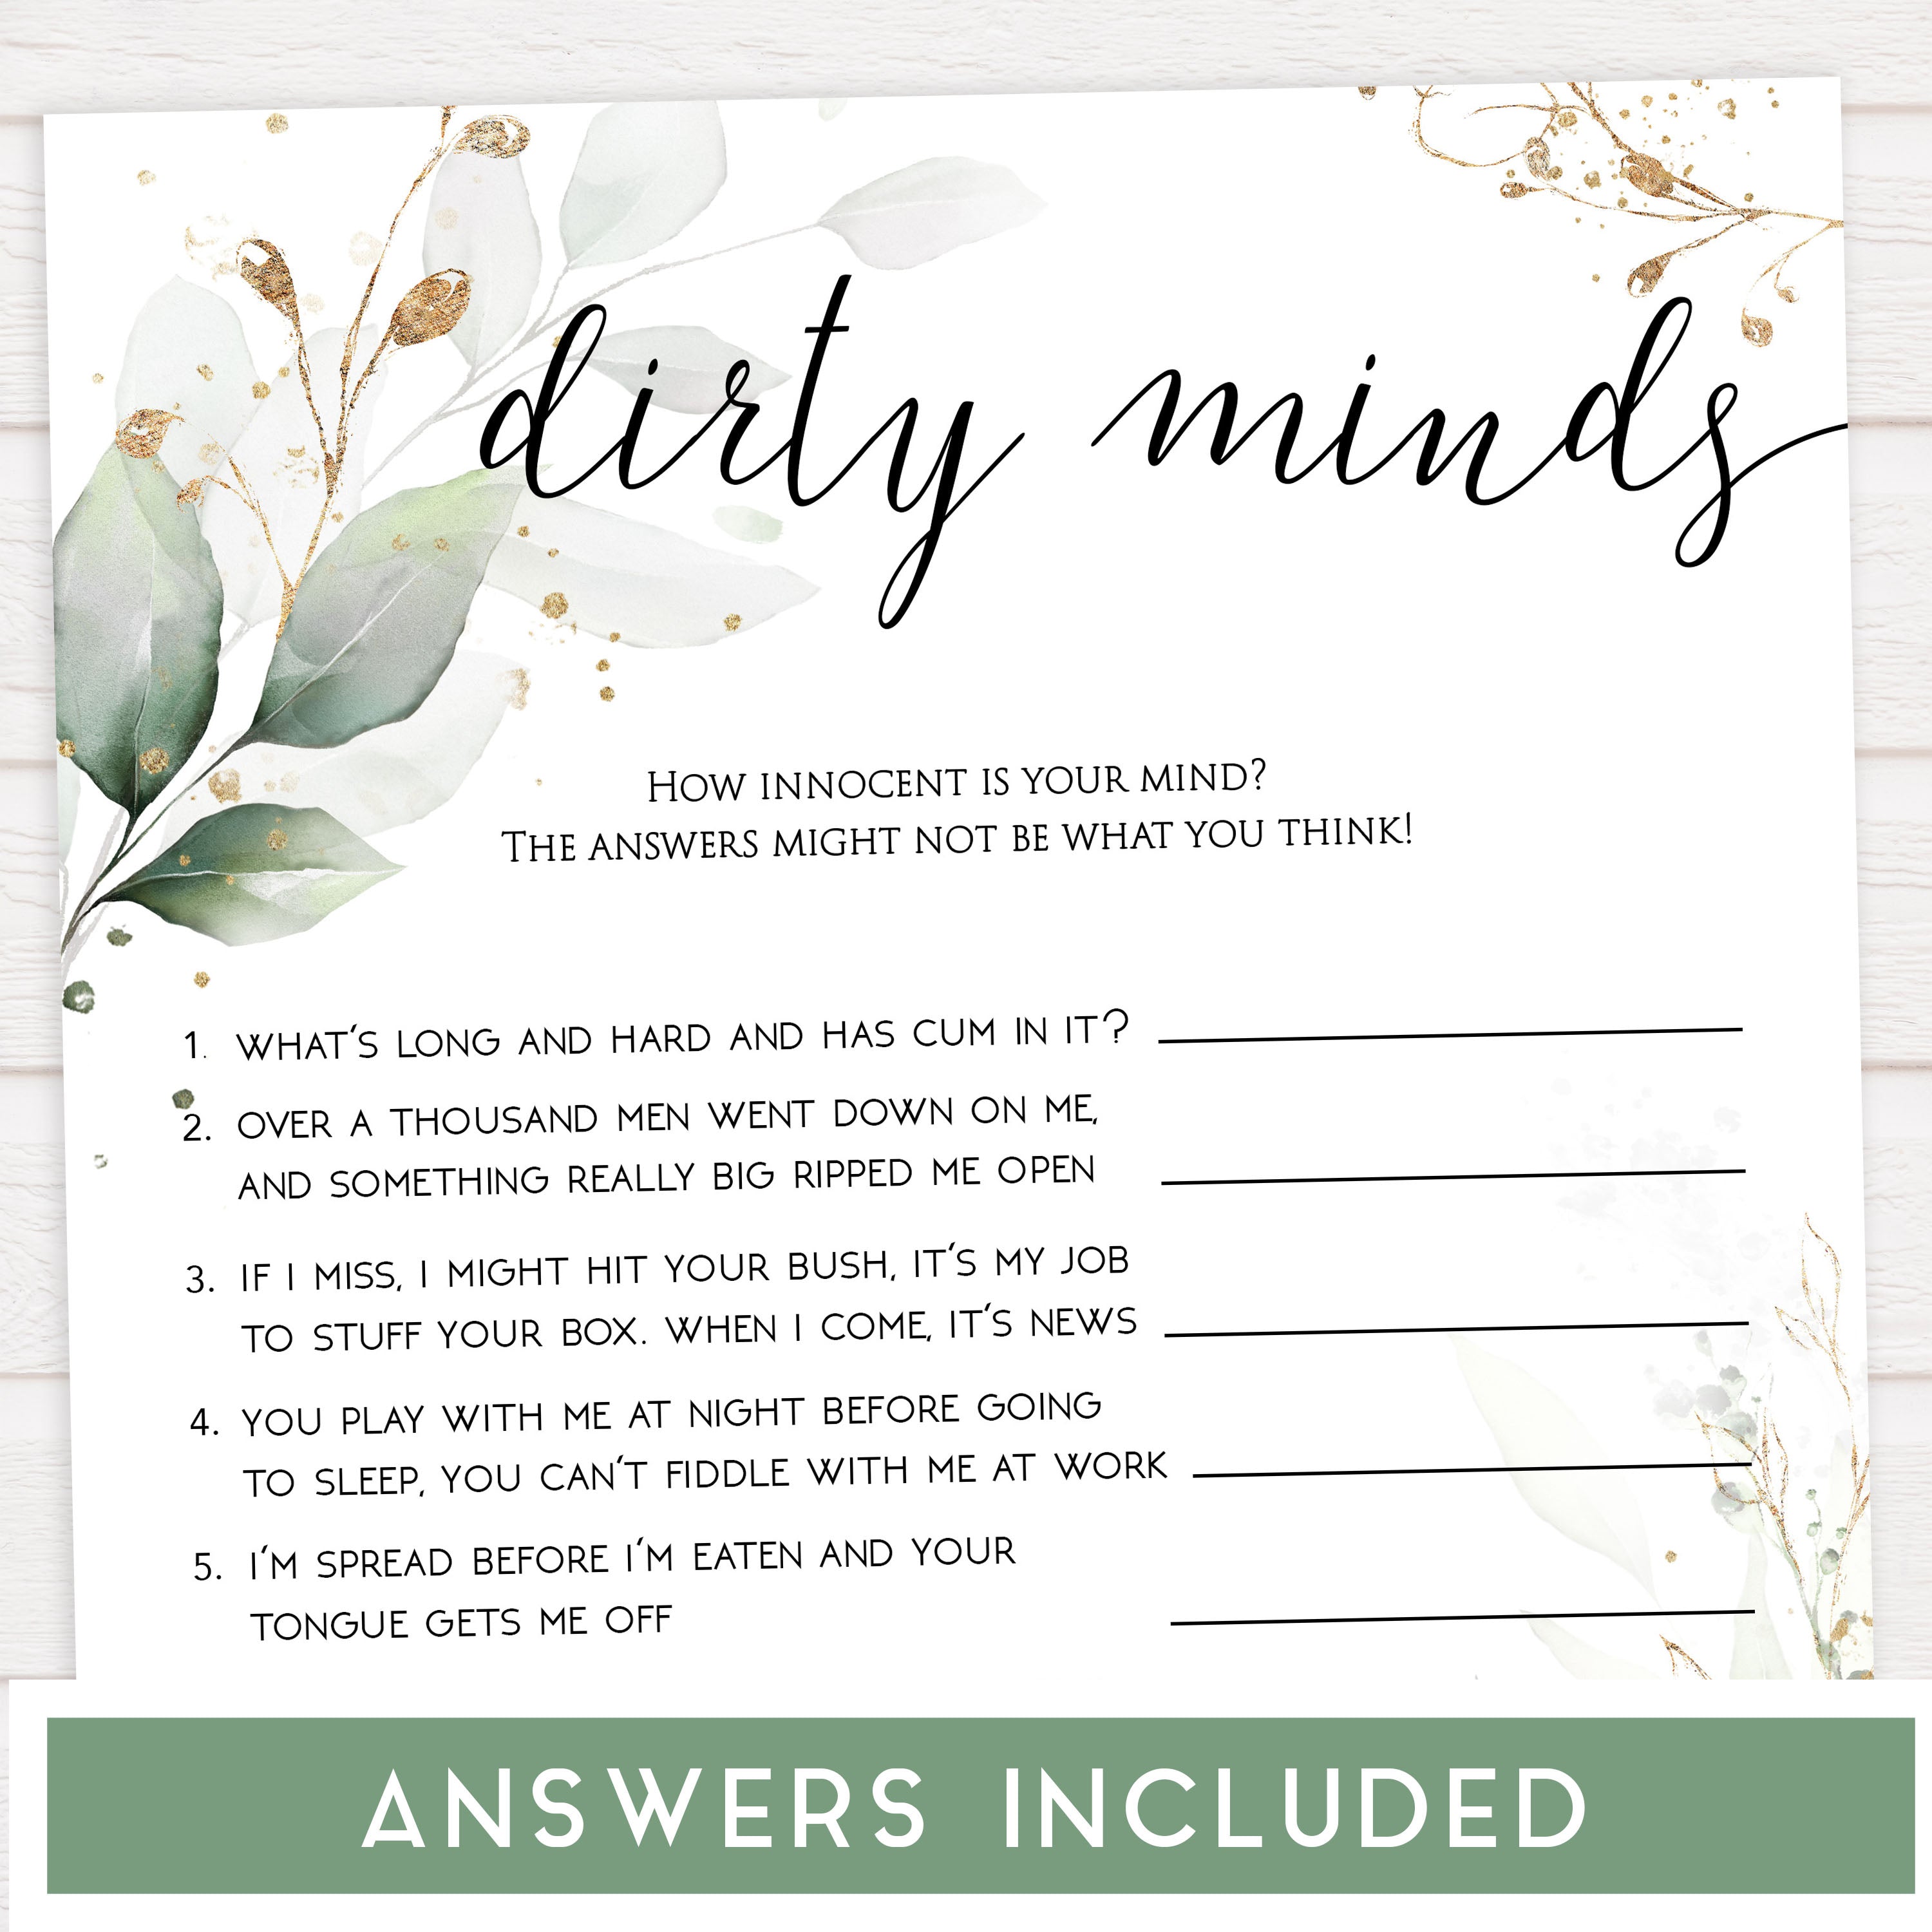 dirty minds bridal game, Printable bachelorette games, greenery bachelorette, gold leaf hen party games, fun hen party games, bachelorette game ideas, greenery adult party games, naughty hen games, naughty bachelorette games